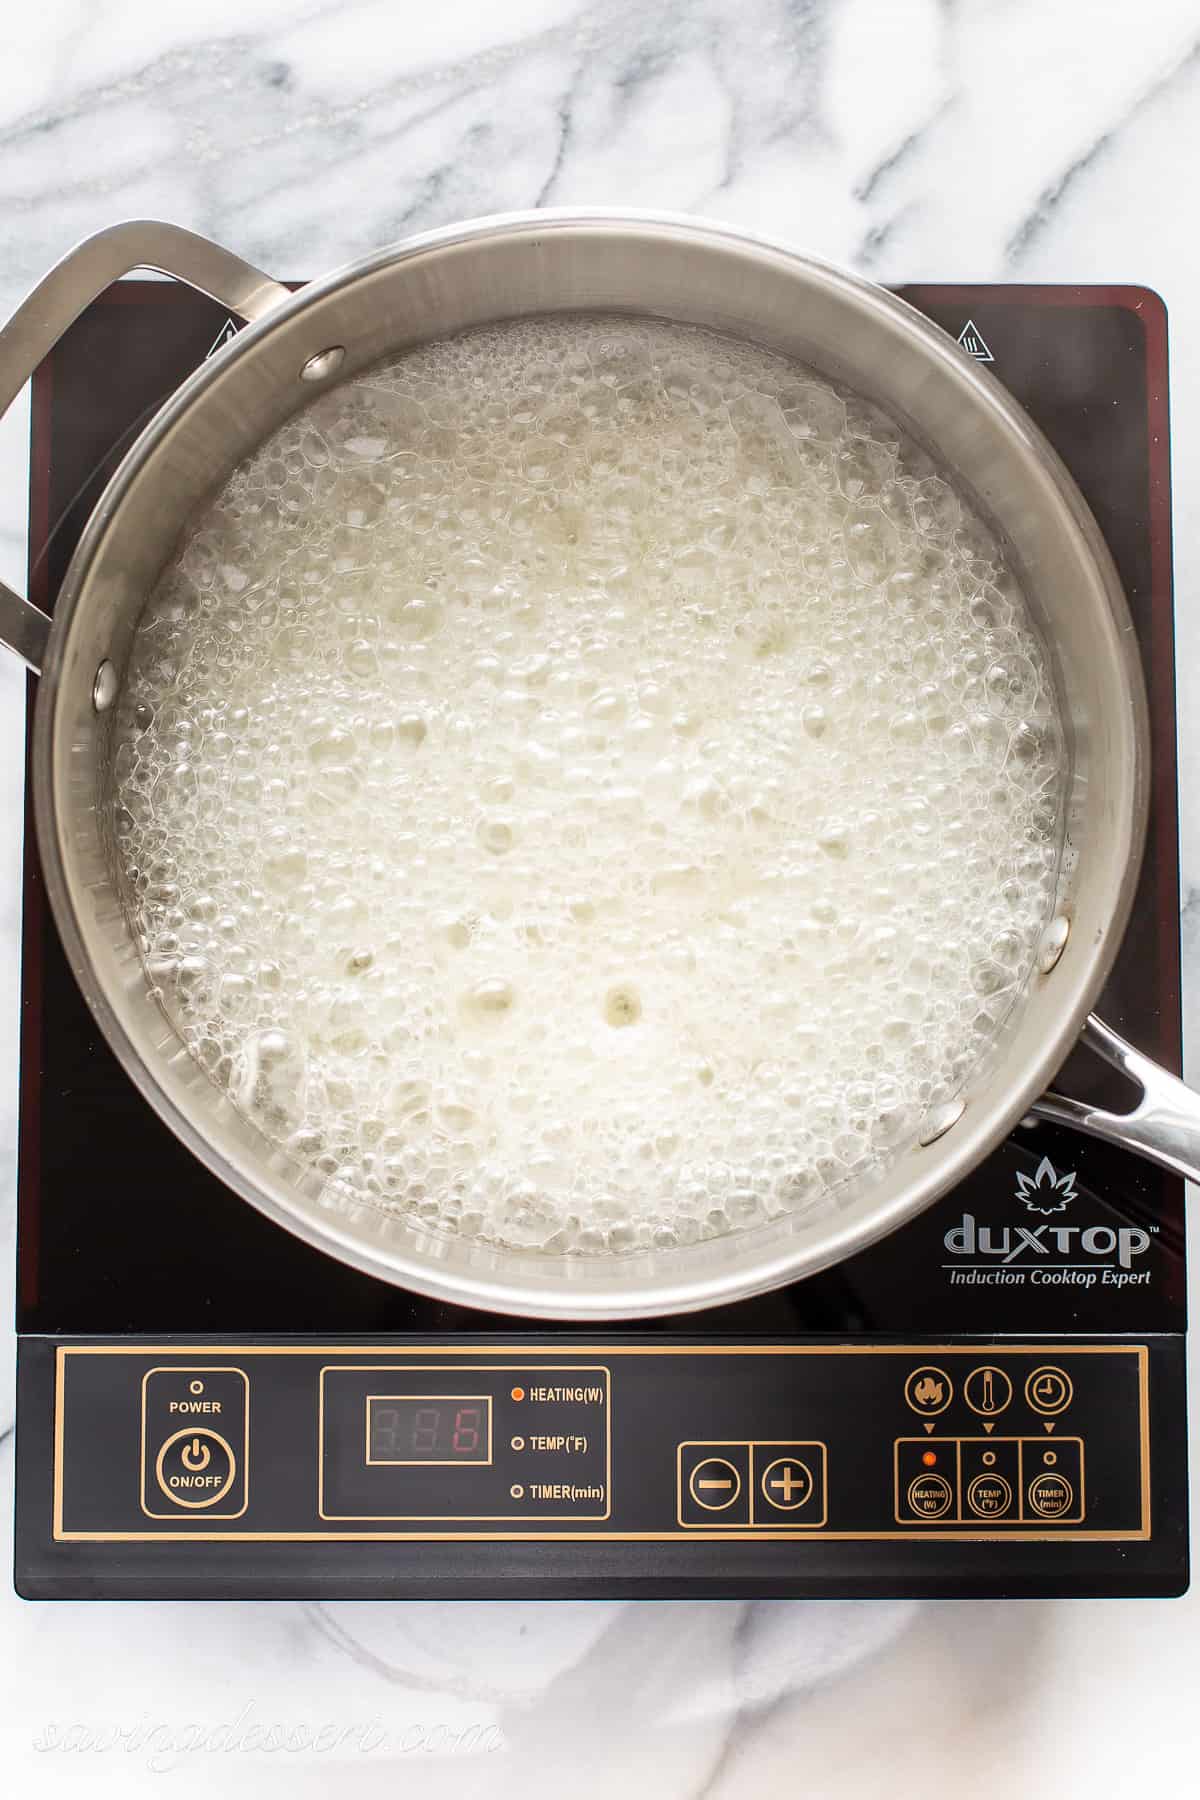 A simple syrup mixture boiling in a saucepan